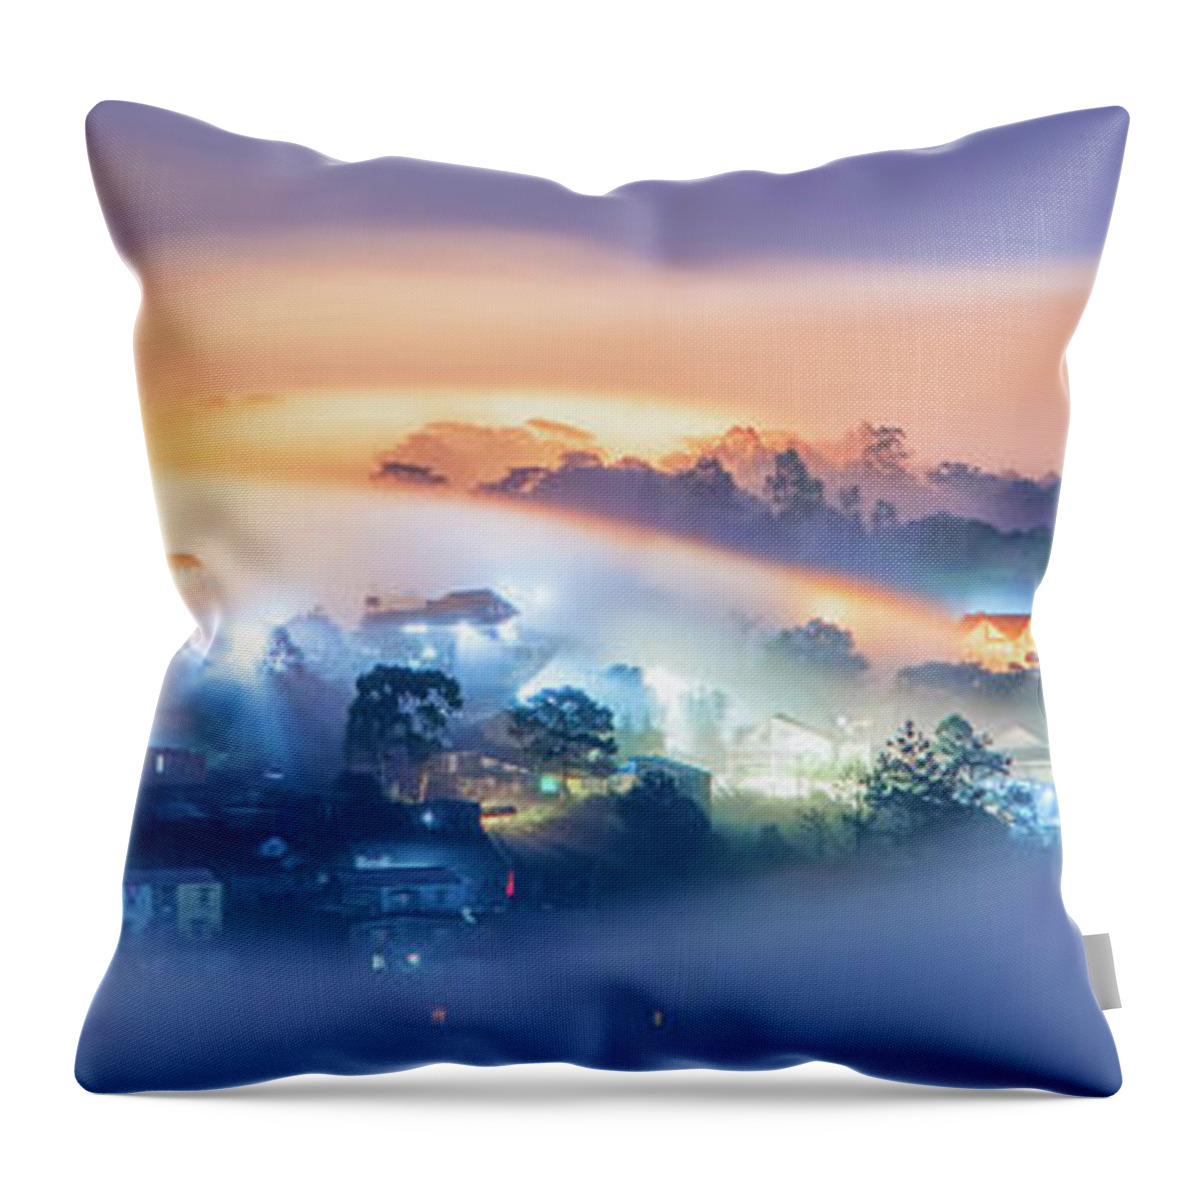 Fog Throw Pillow featuring the photograph the Eyes by Khanh Bui Phu